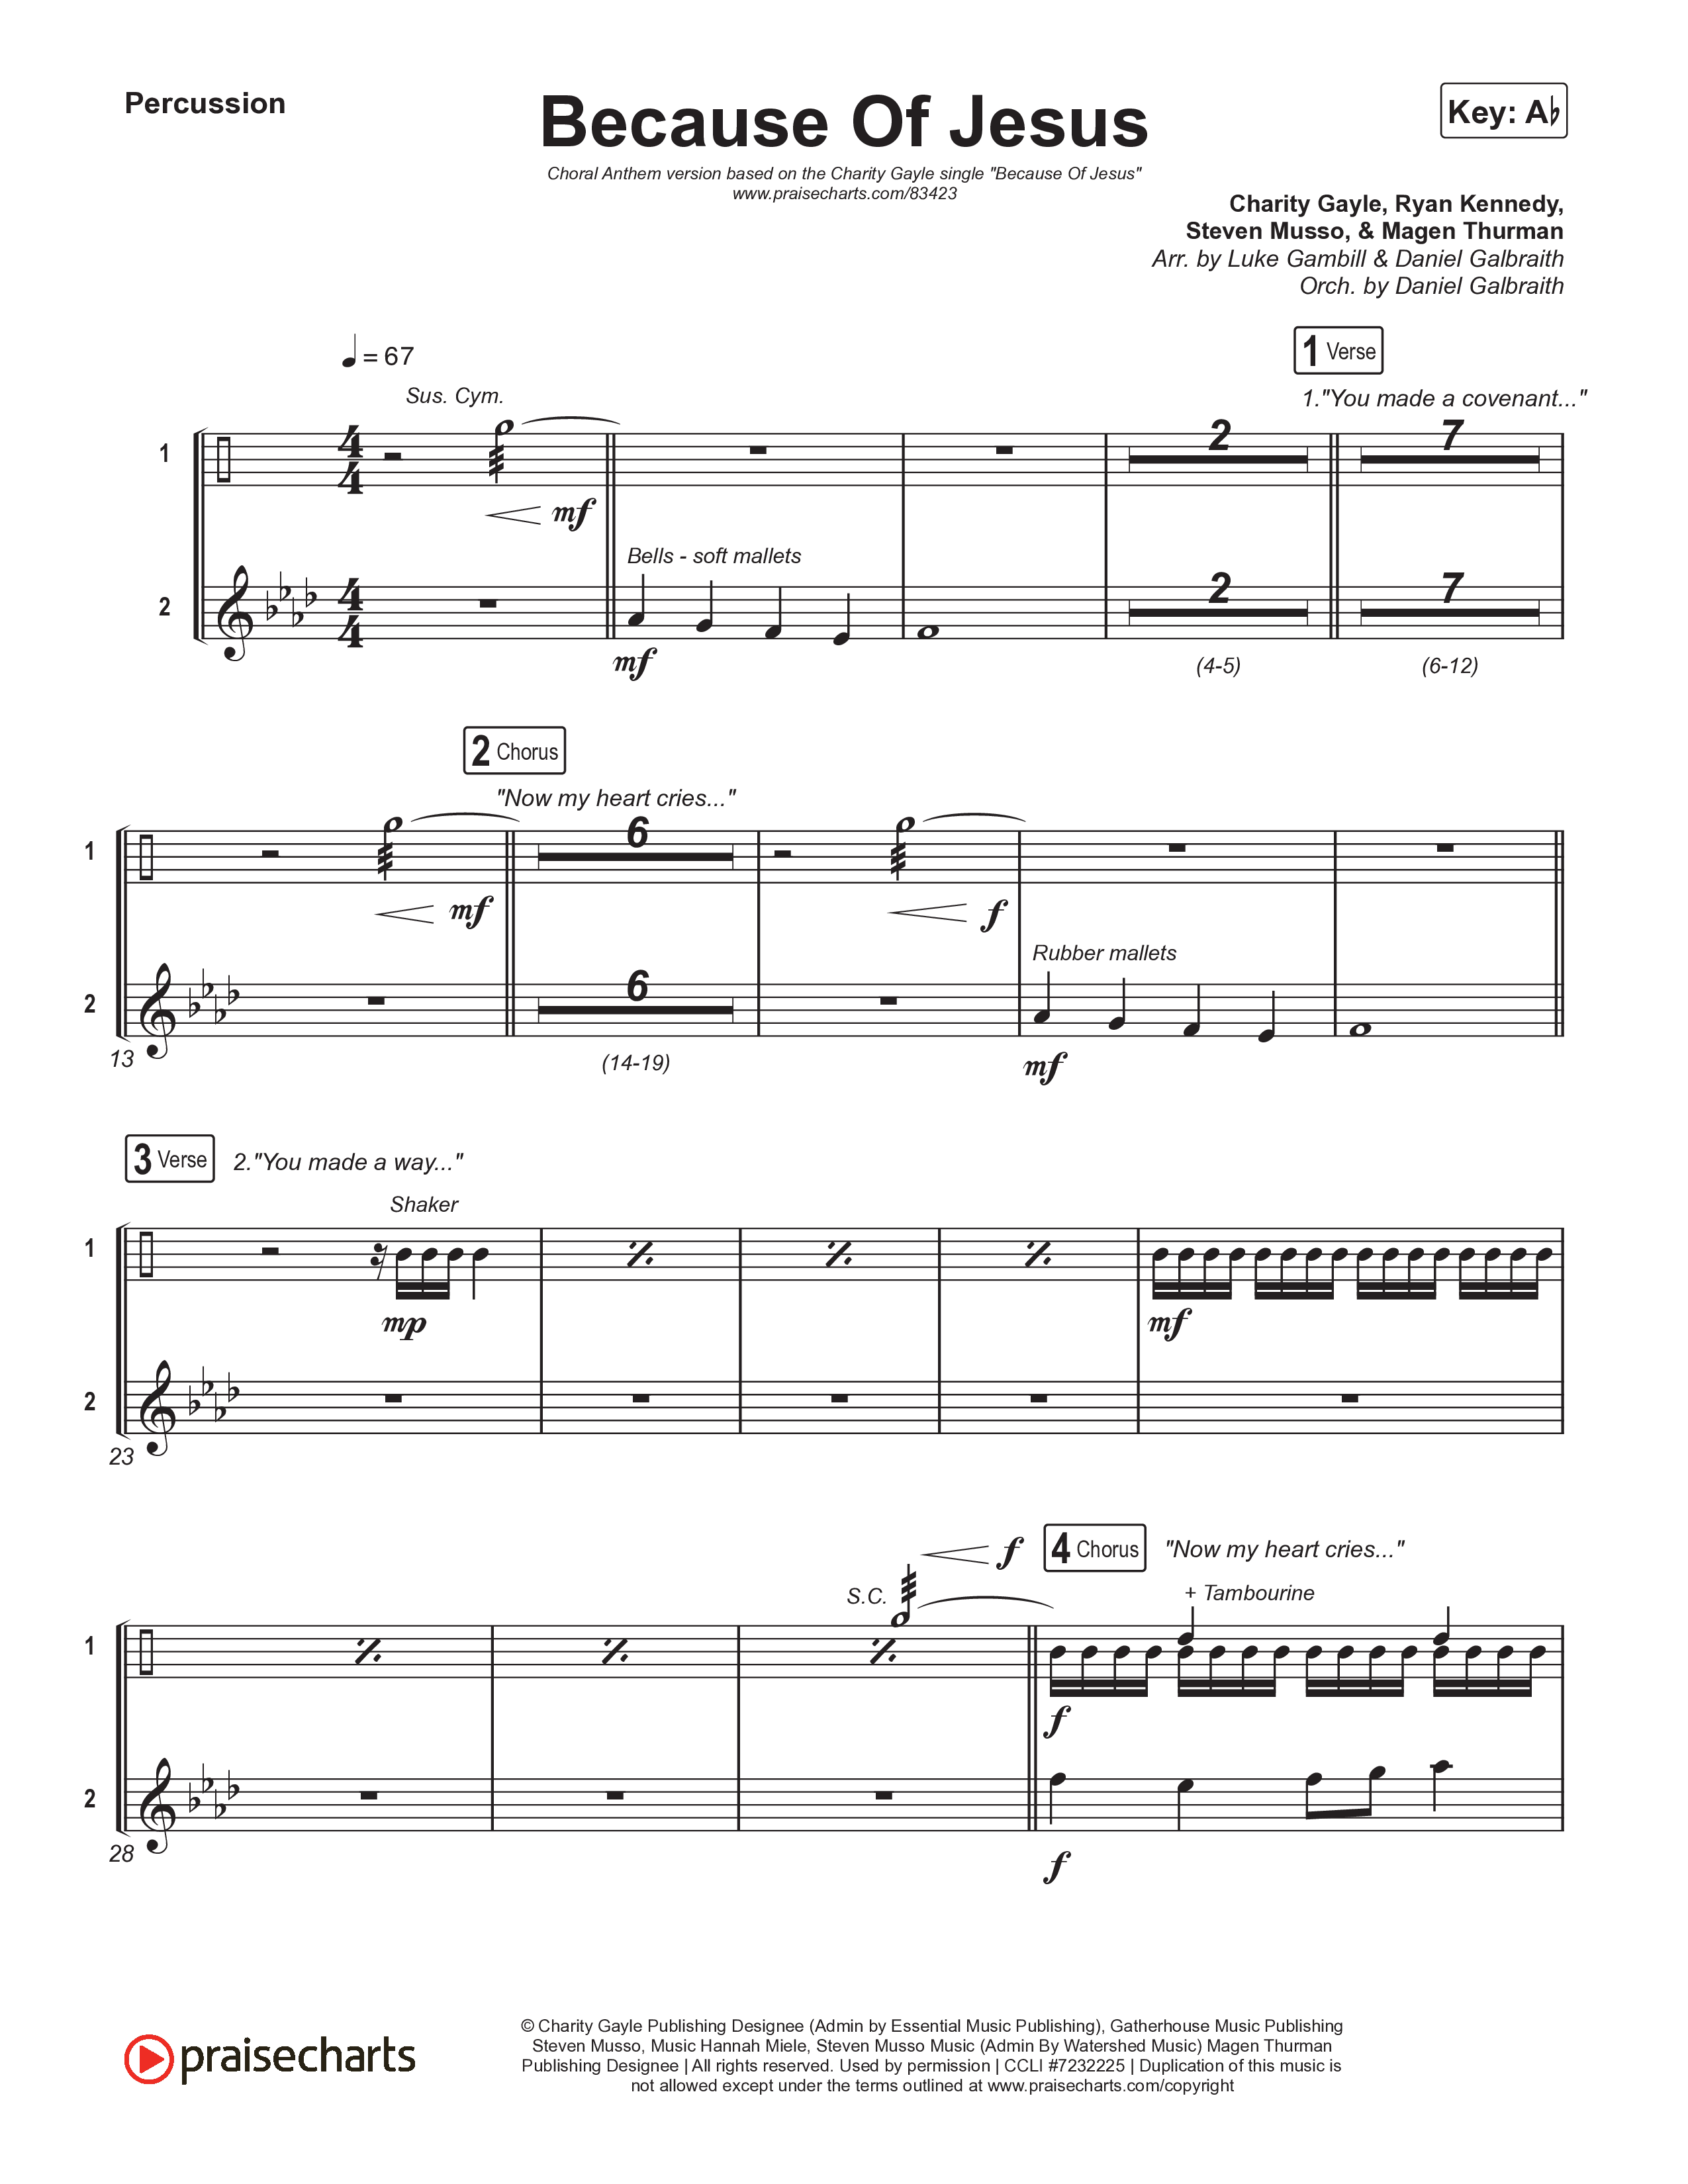 Because Of Jesus (Choral Anthem SATB) Percussion (Charity Gayle / Arr. Luke Gambill)